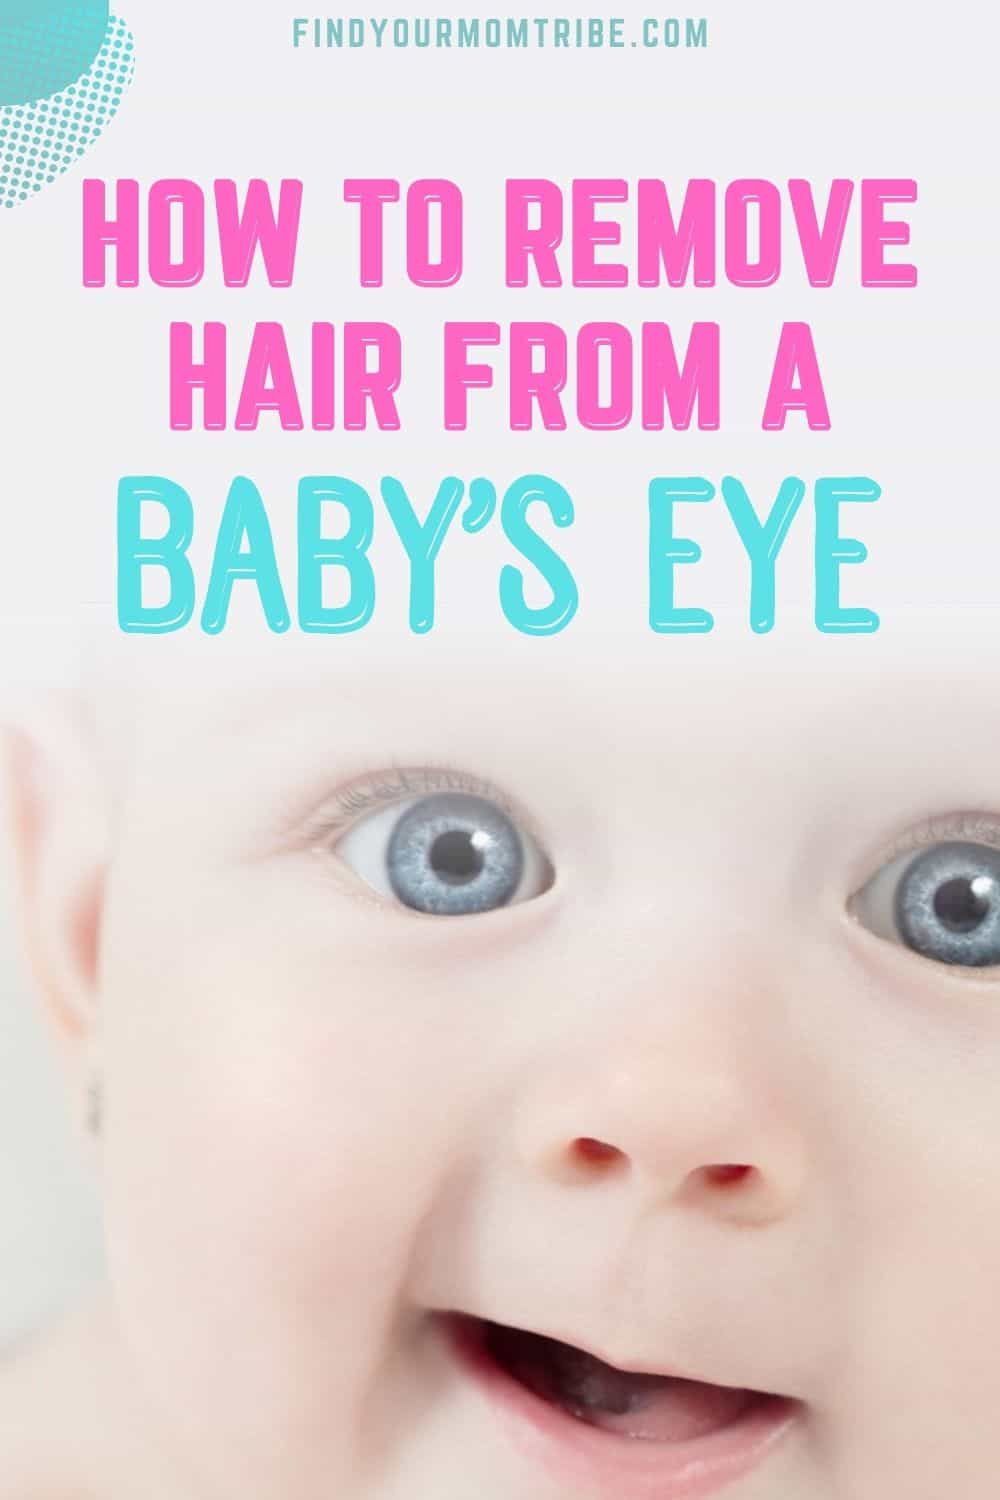 How To Deal With Hair In Baby Eye The Easy Way